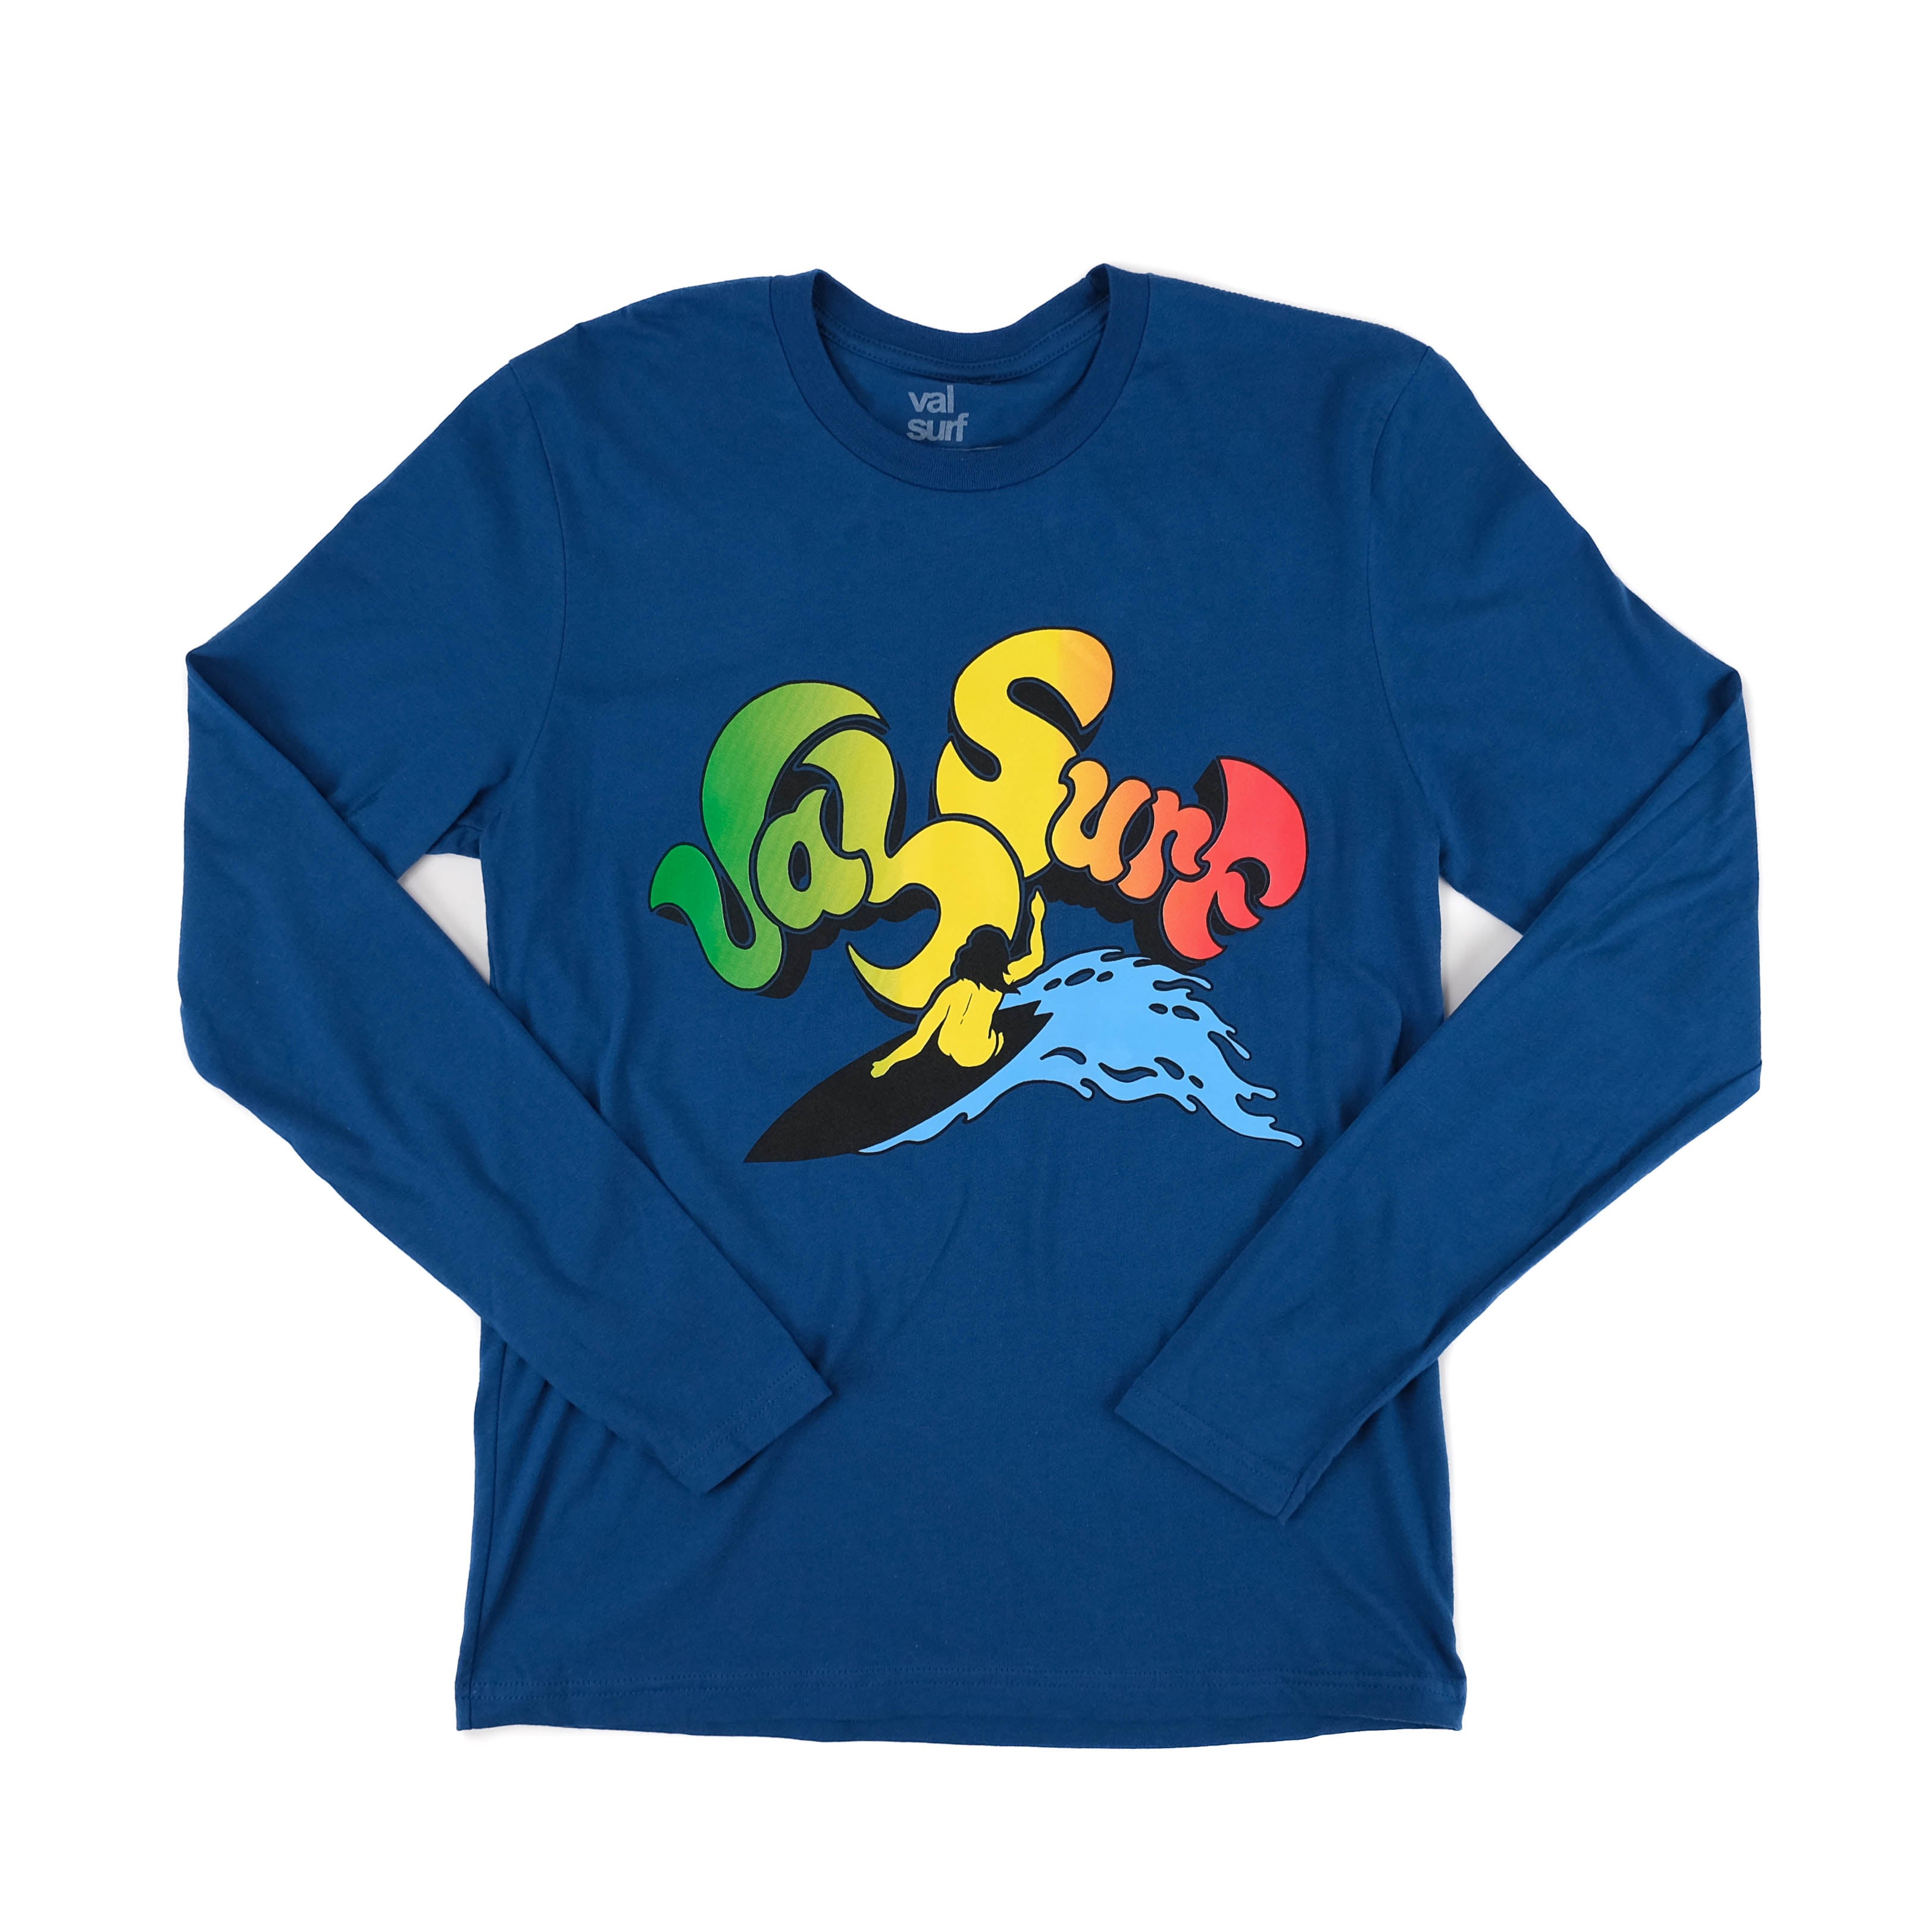 TBTee Frontside L/S Tee - Cool Blue